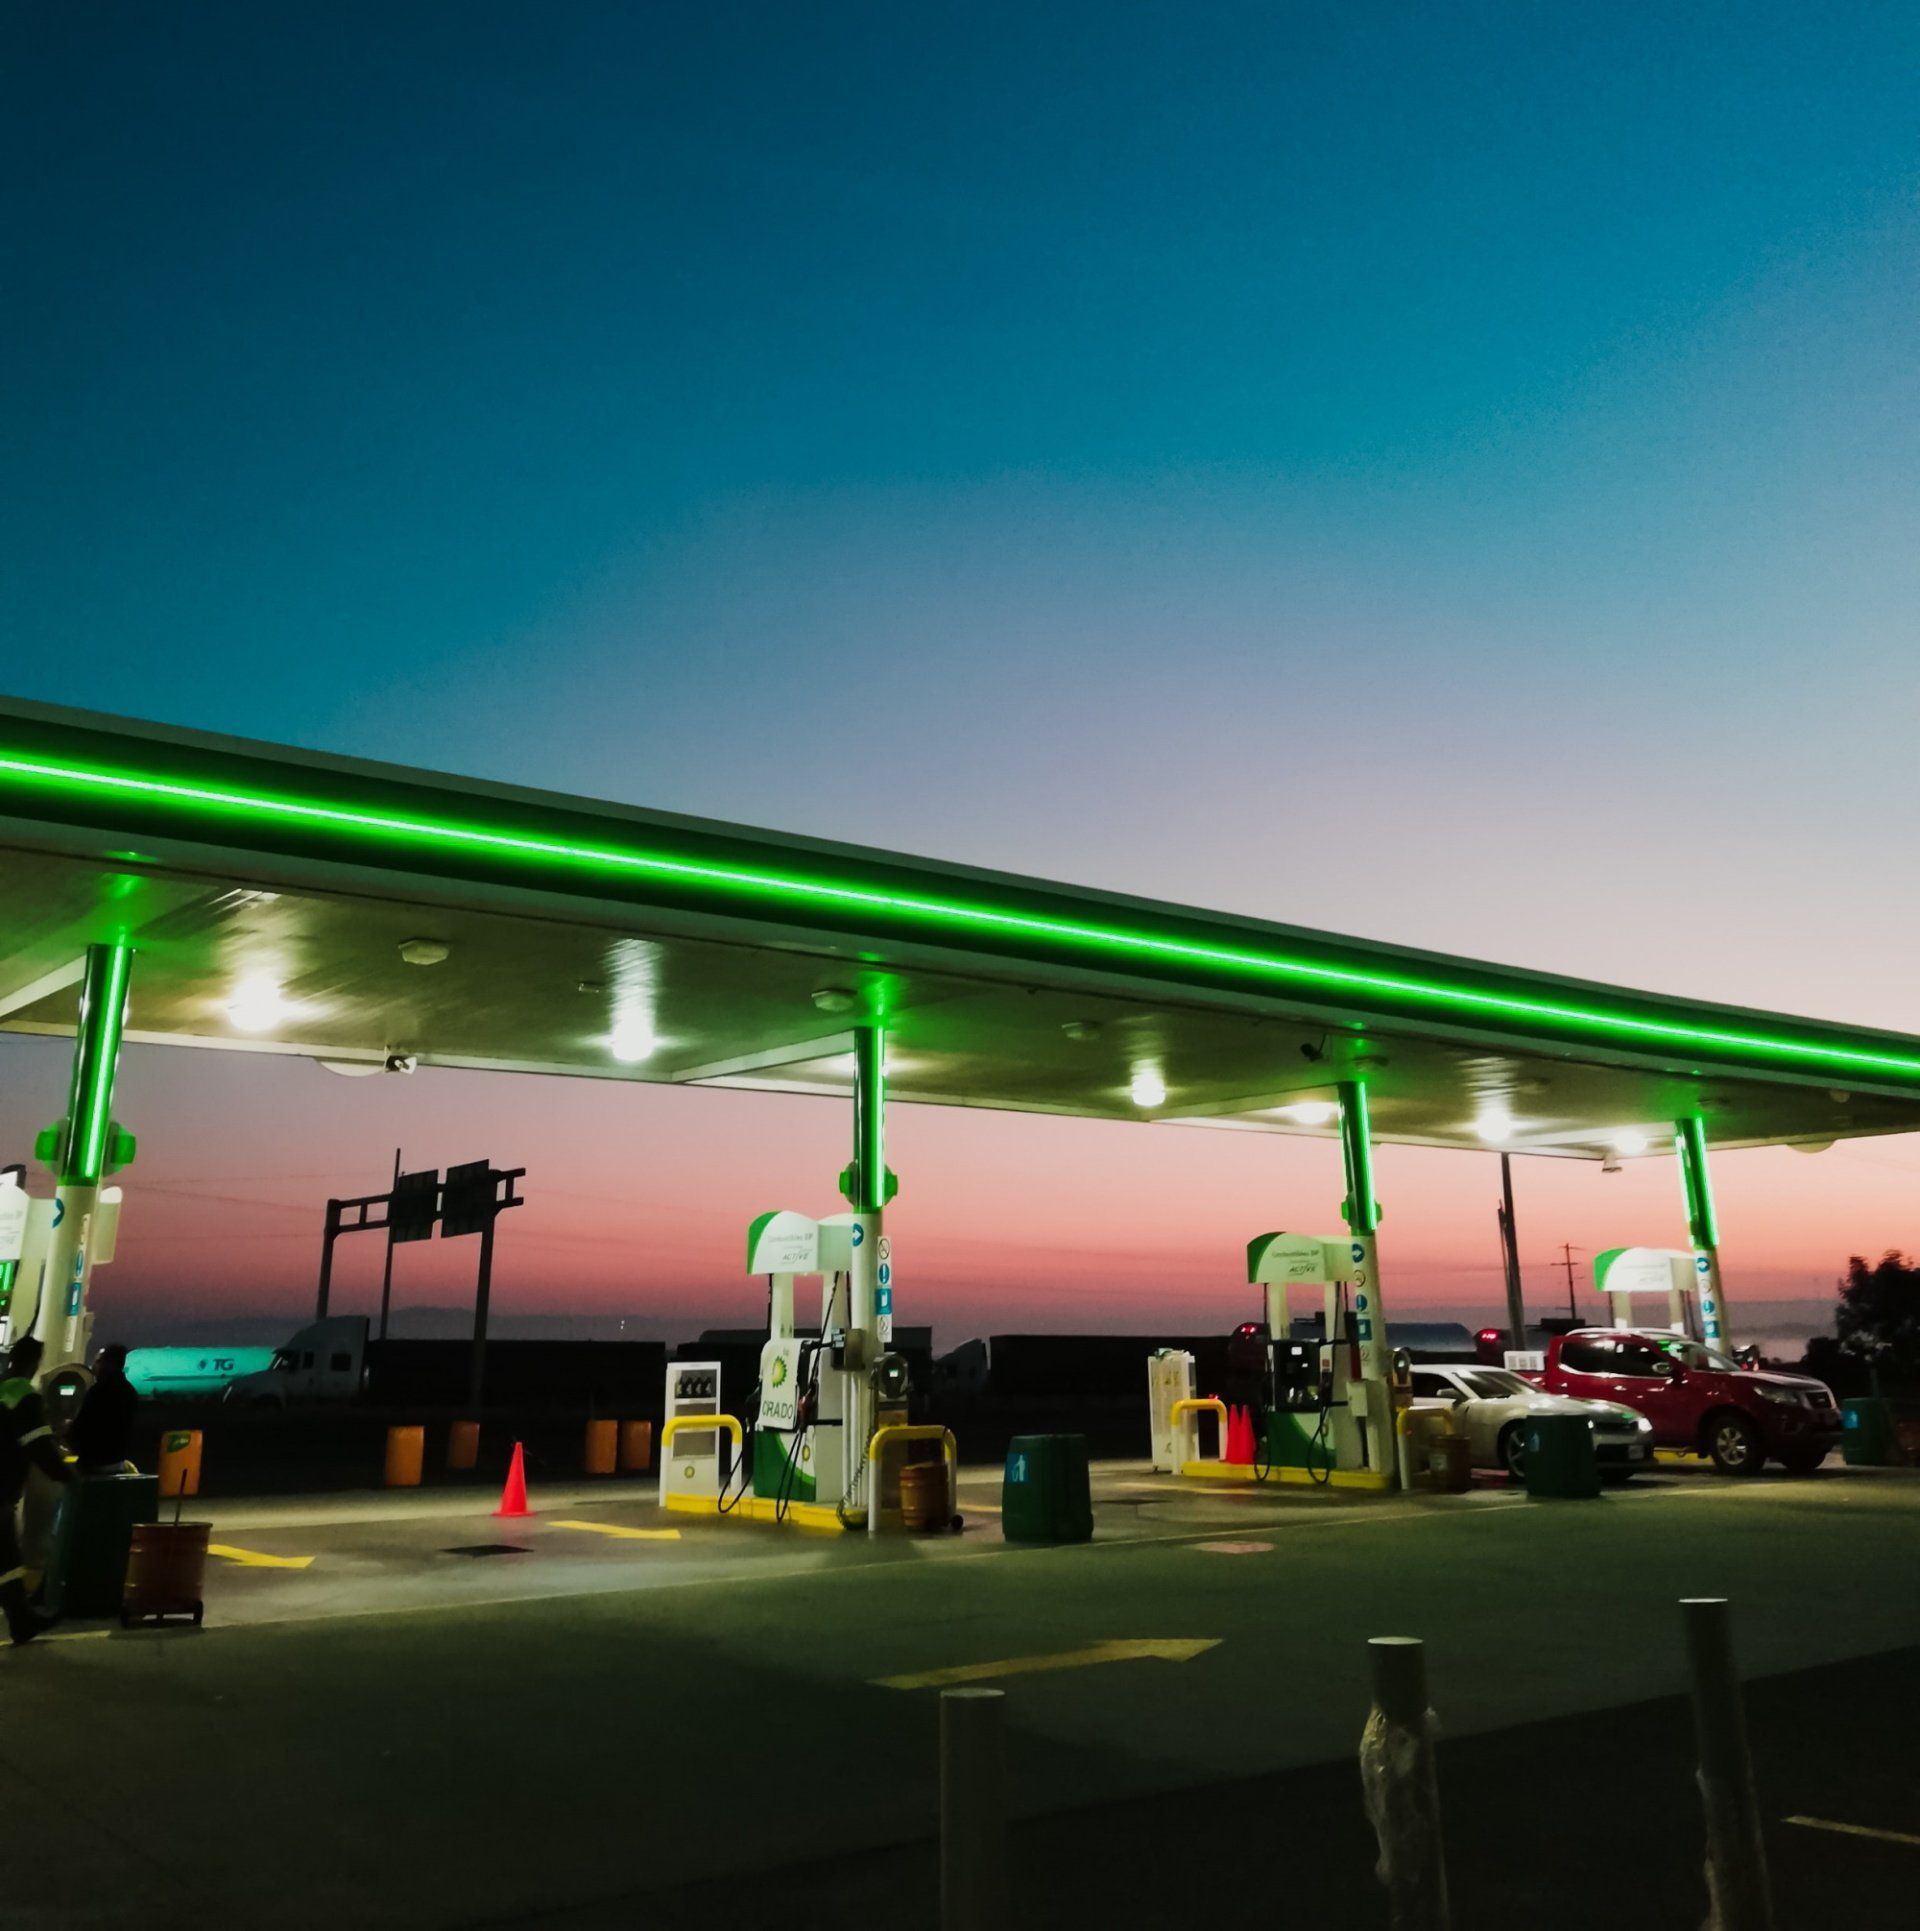 A gas station at night with green lights on the roof